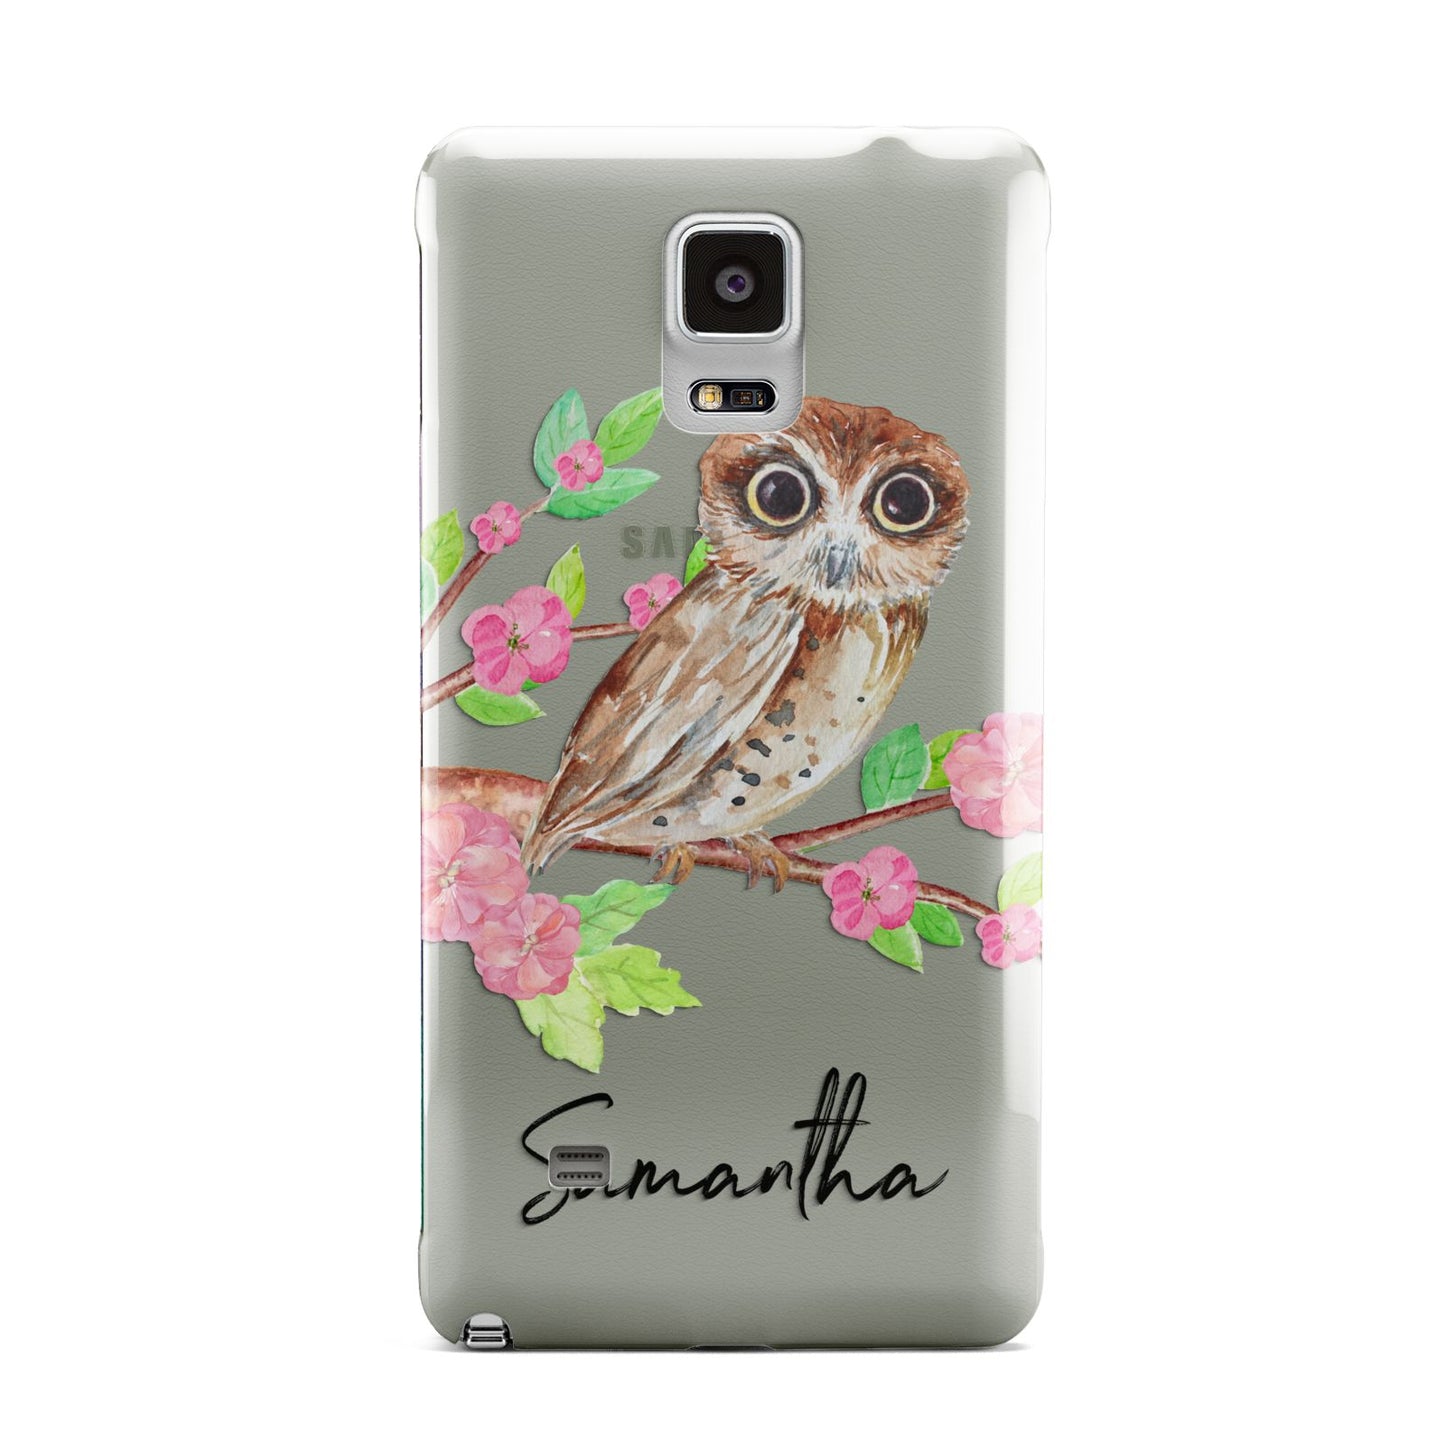 Personalised Owl Samsung Galaxy Note 4 Case